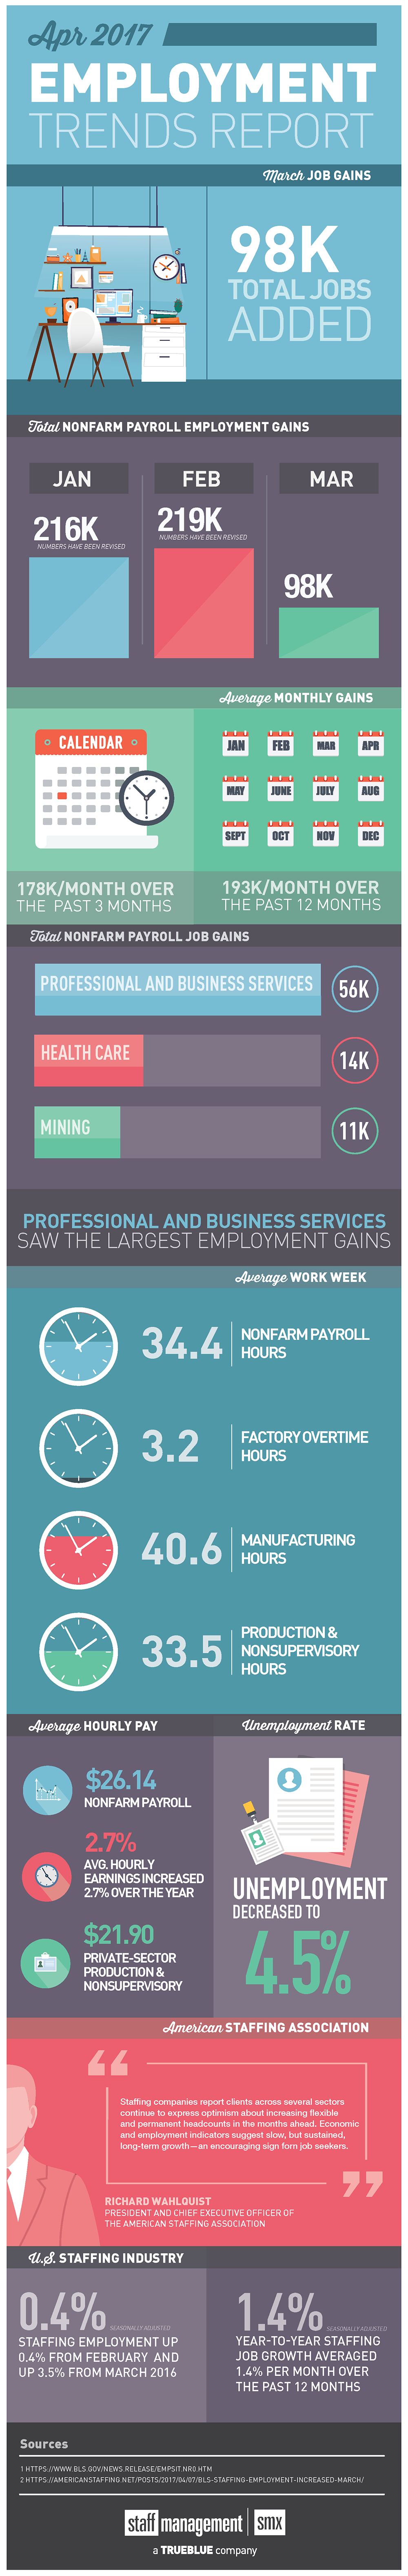 april-2017-employment-trends-infographic-staff-management-smx